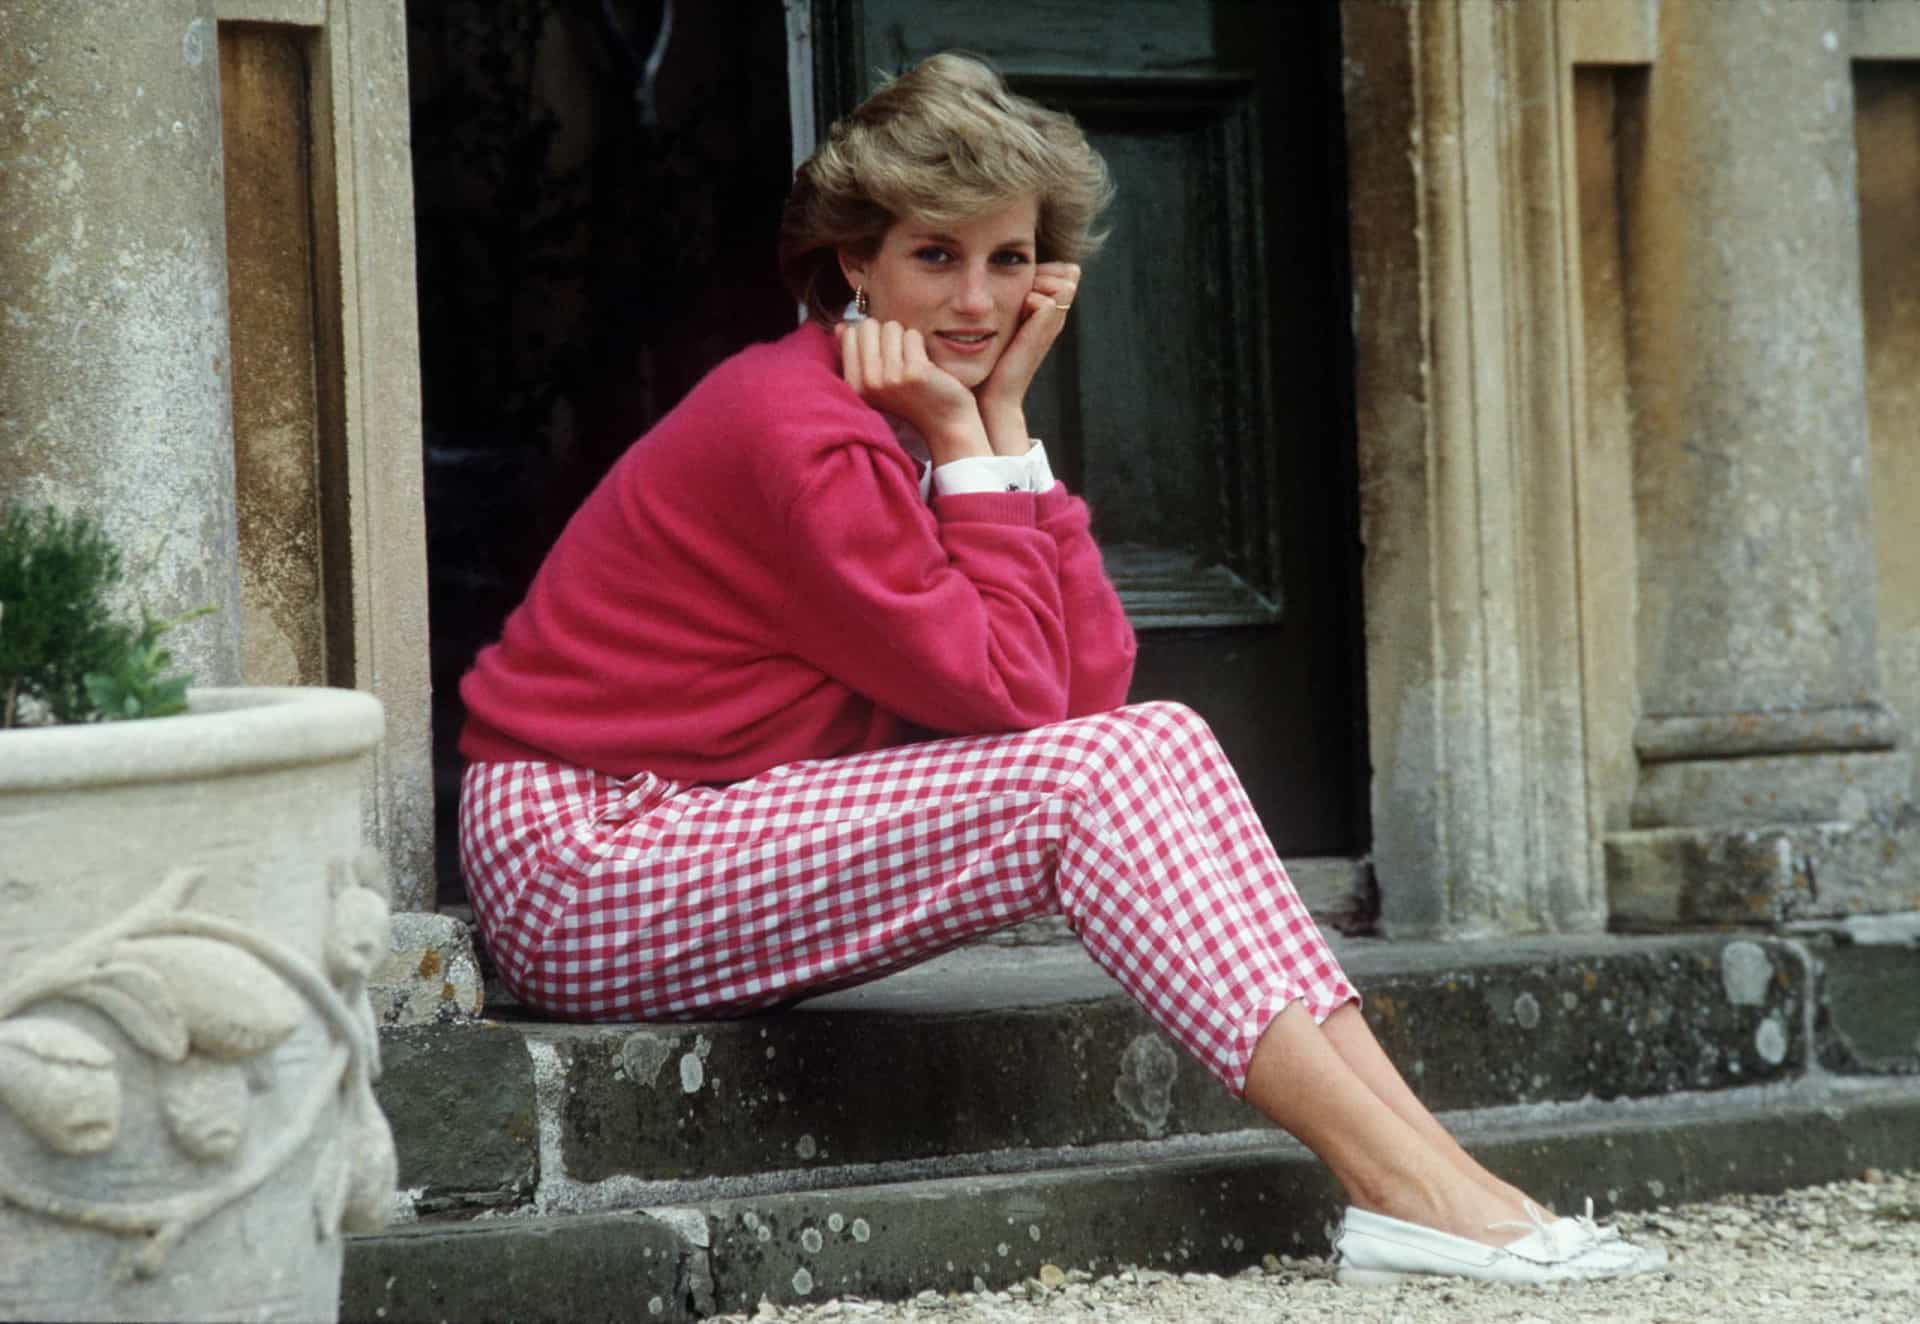 <p>Diana became Princess of Wales upon their marriage in 1981. And though they divorced in 1996, she was still styled Princess of Wales until she passed away.</p><p><a href="https://www.msn.com/en-us/community/channel/vid-7xx8mnucu55yw63we9va2gwr7uihbxwc68fxqp25x6tg4ftibpra?cvid=94631541bc0f4f89bfd59158d696ad7e">Follow us and access great exclusive content everyday</a></p>